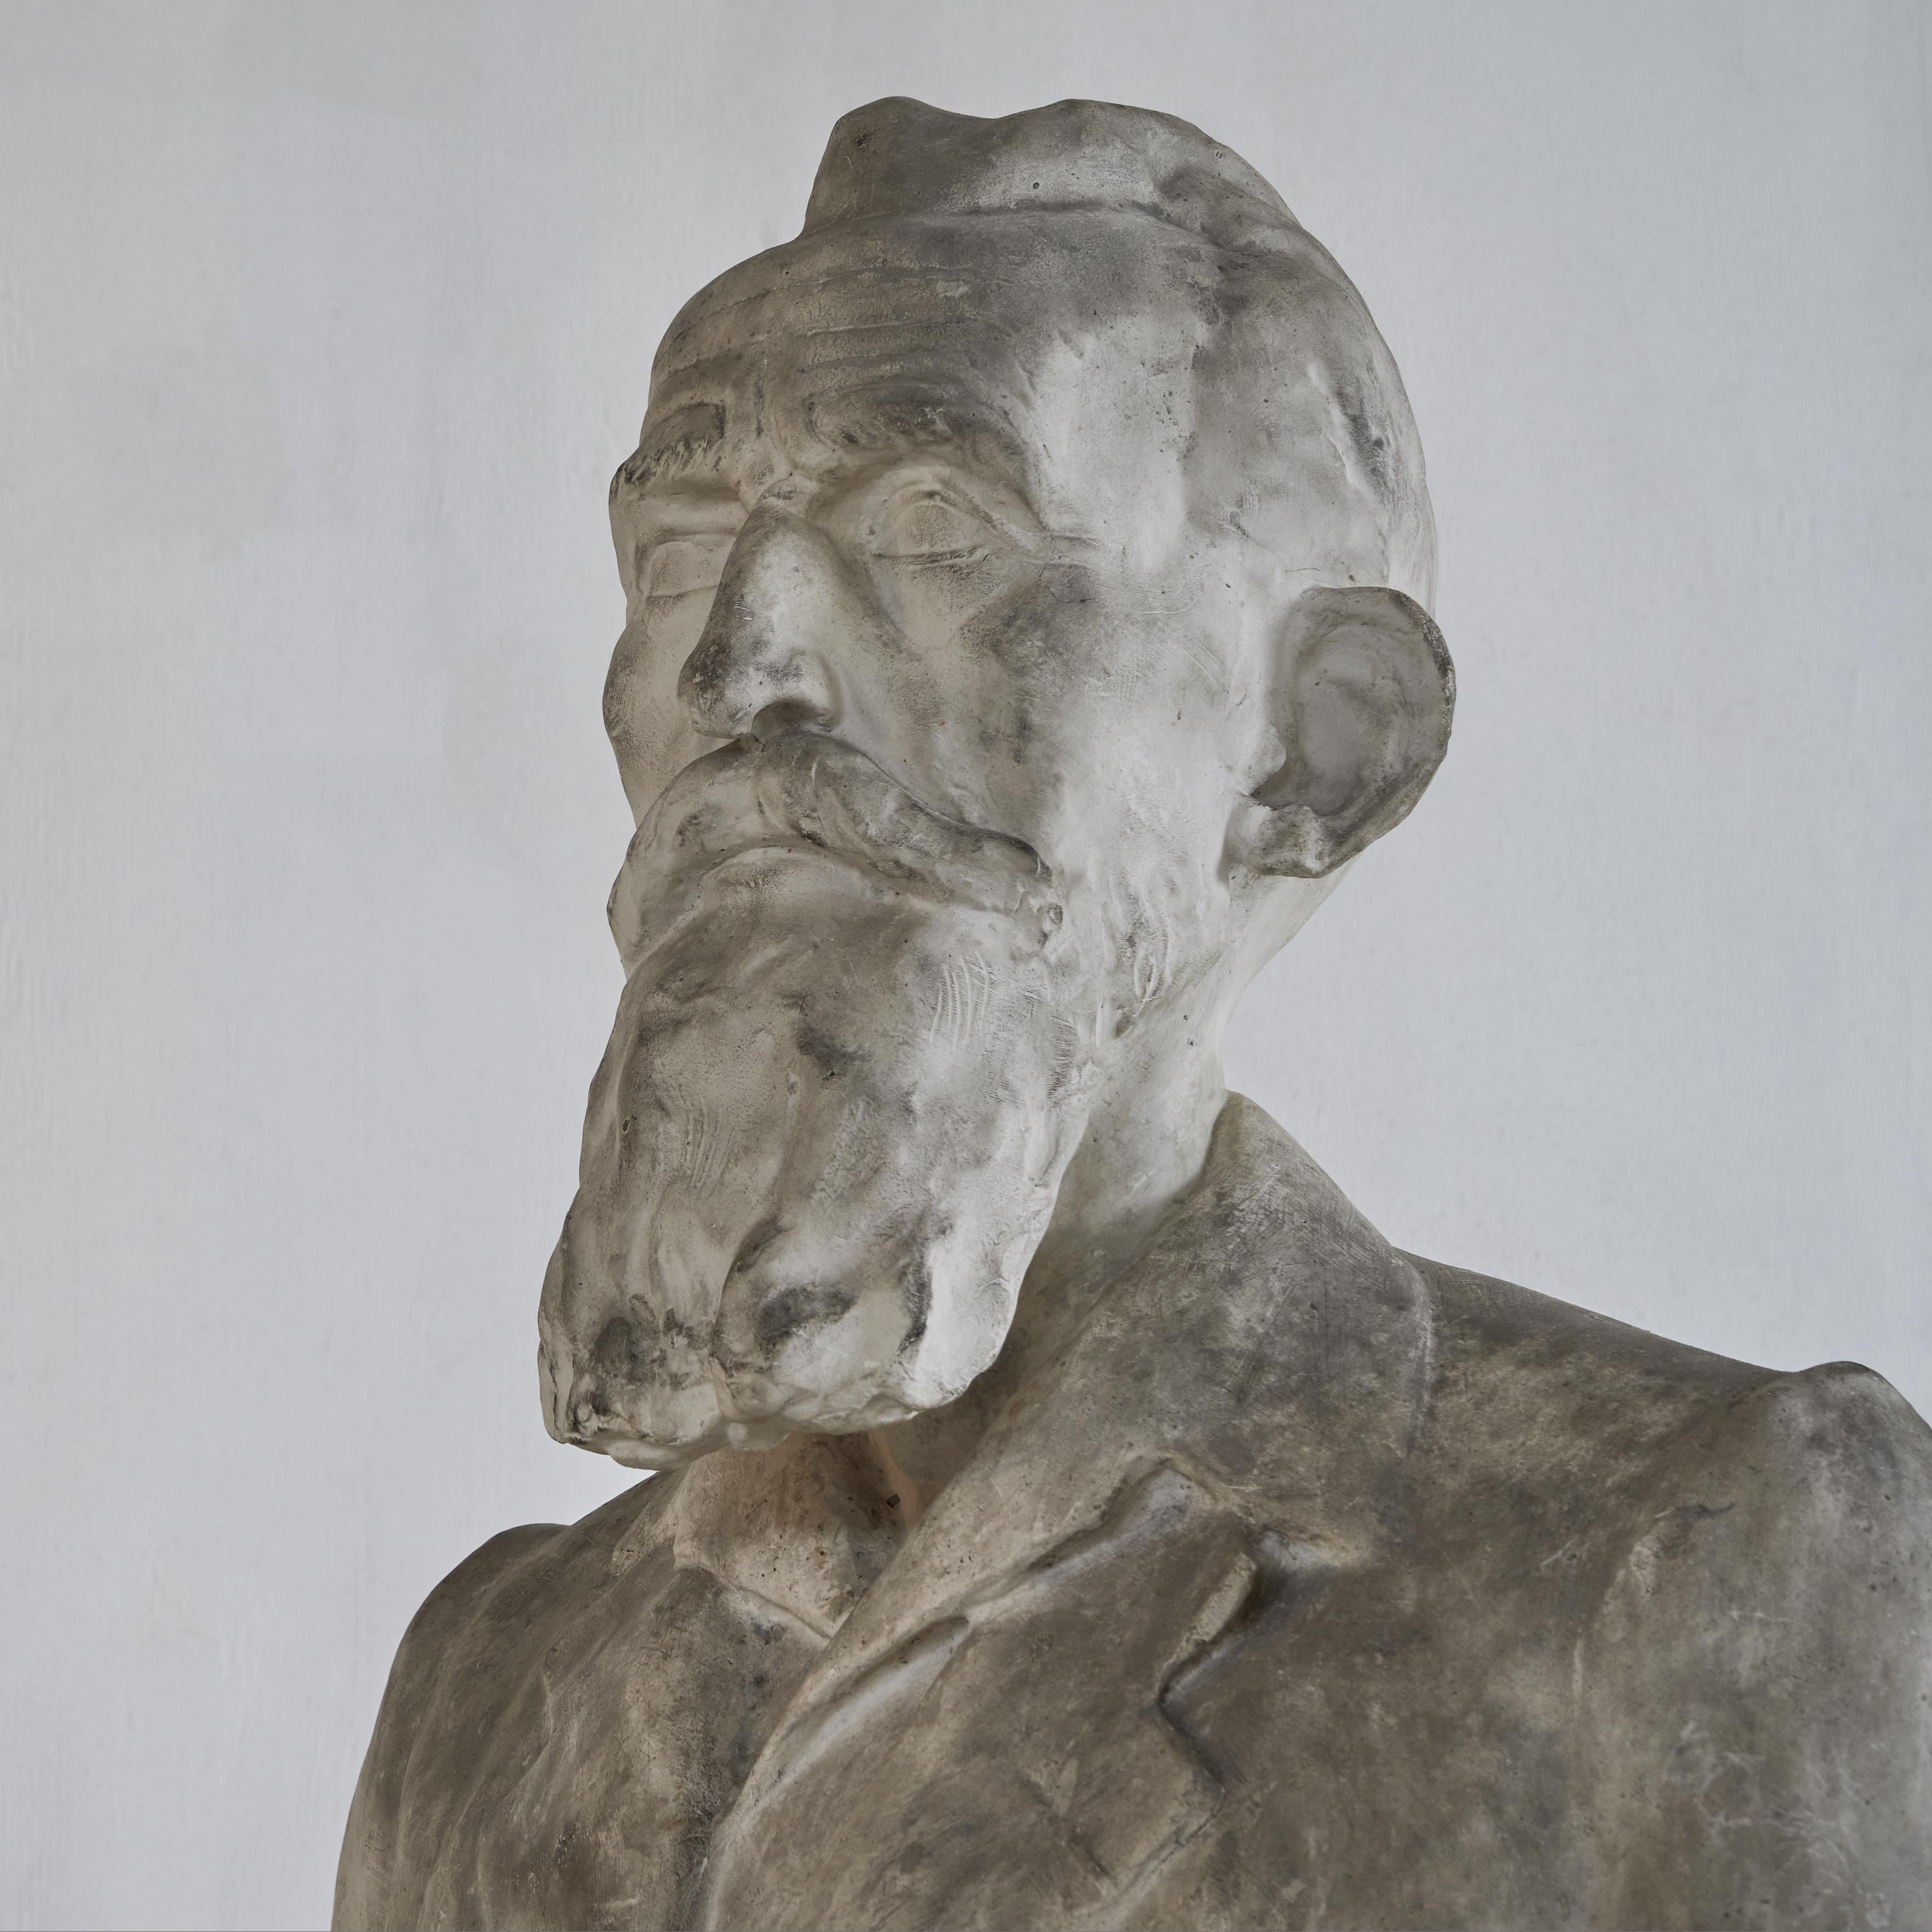 Plaster bust of a bearded male made by Belgian artist Nelly Pourbaix somewhere around 1940.

This bust is part of a series of eight sculptures by Pourbaix. Several others are to be found in the collection of museum Schloss Moyland. 

Nelly